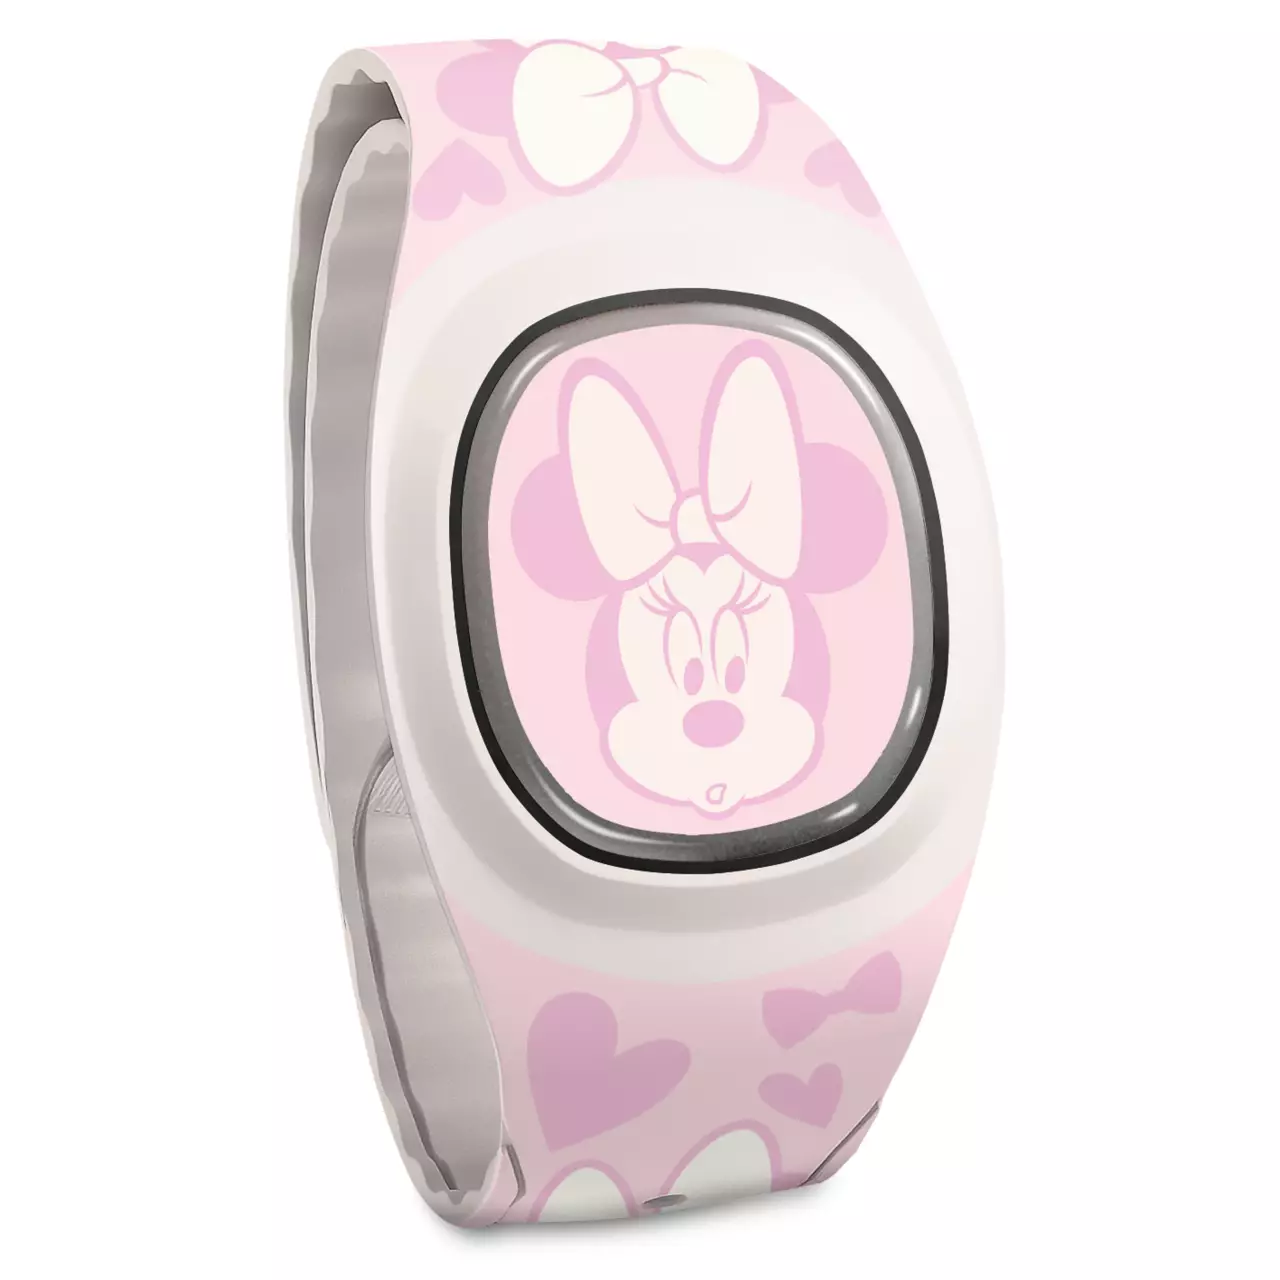 Minnie Mouse MagicBand+